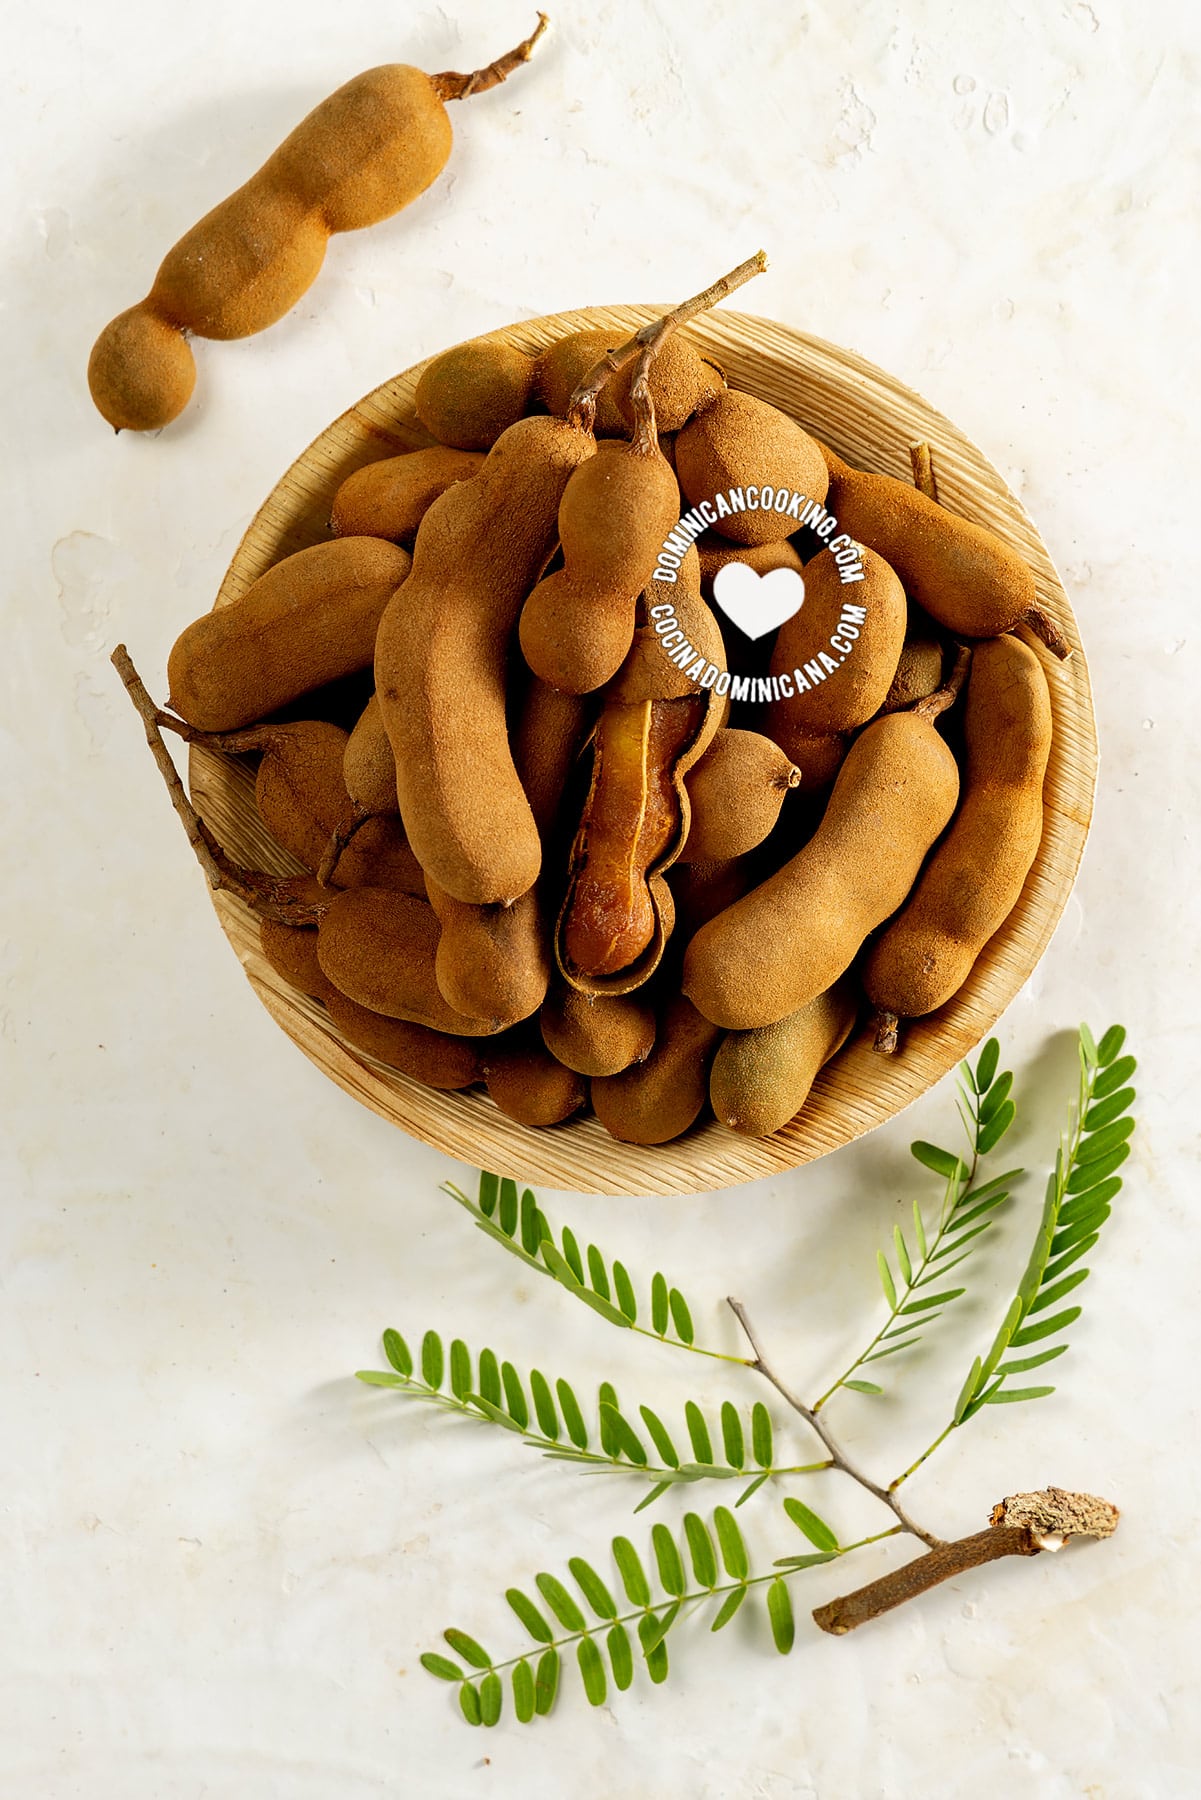 Tamarind fruits (pods and leaves)